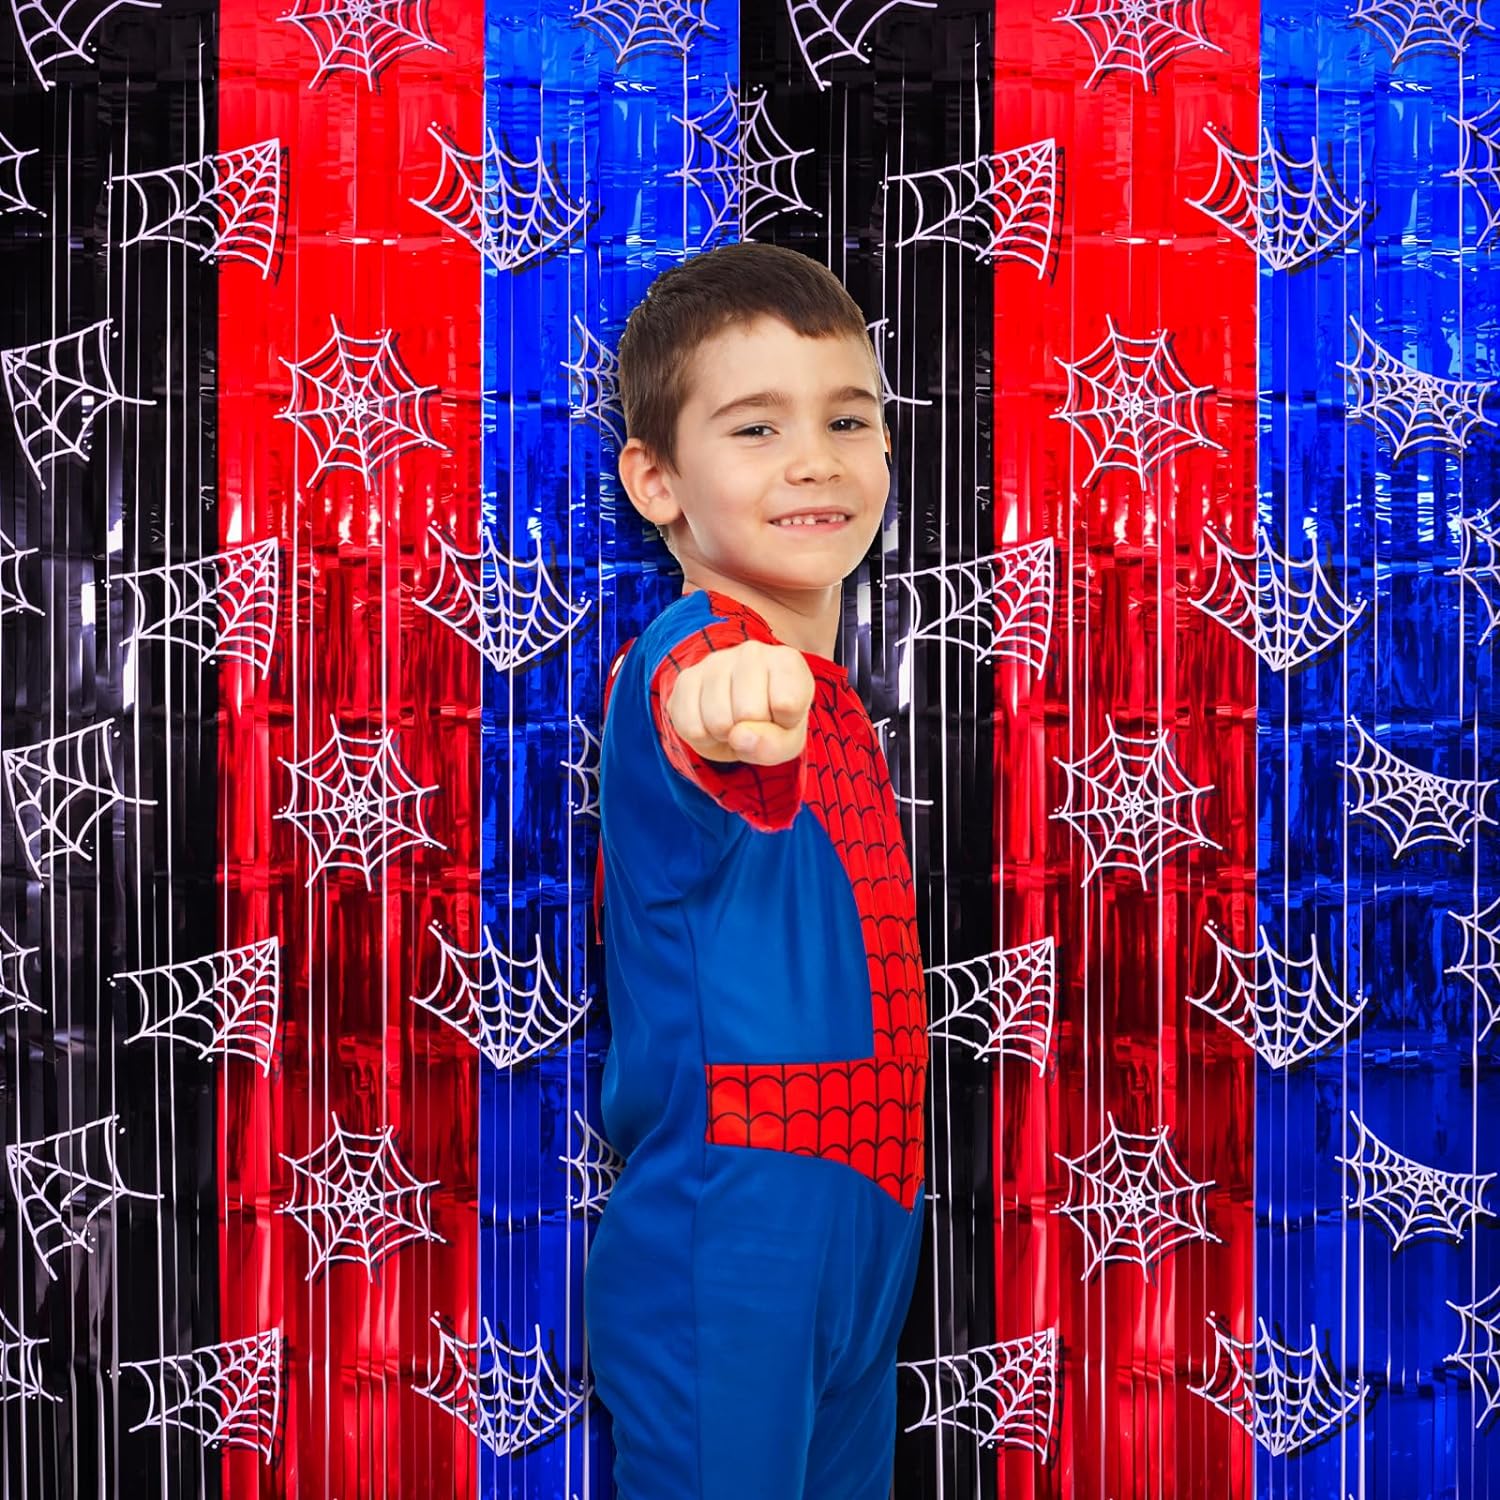 Bulk 2 Pcs Spider Web Party Decor 3.3x6.6ft Tinsel Foil Fringe Curtains Red lack and Blue Photo Booth Backdrop for Boys' Birthday Celebrations Wholesale